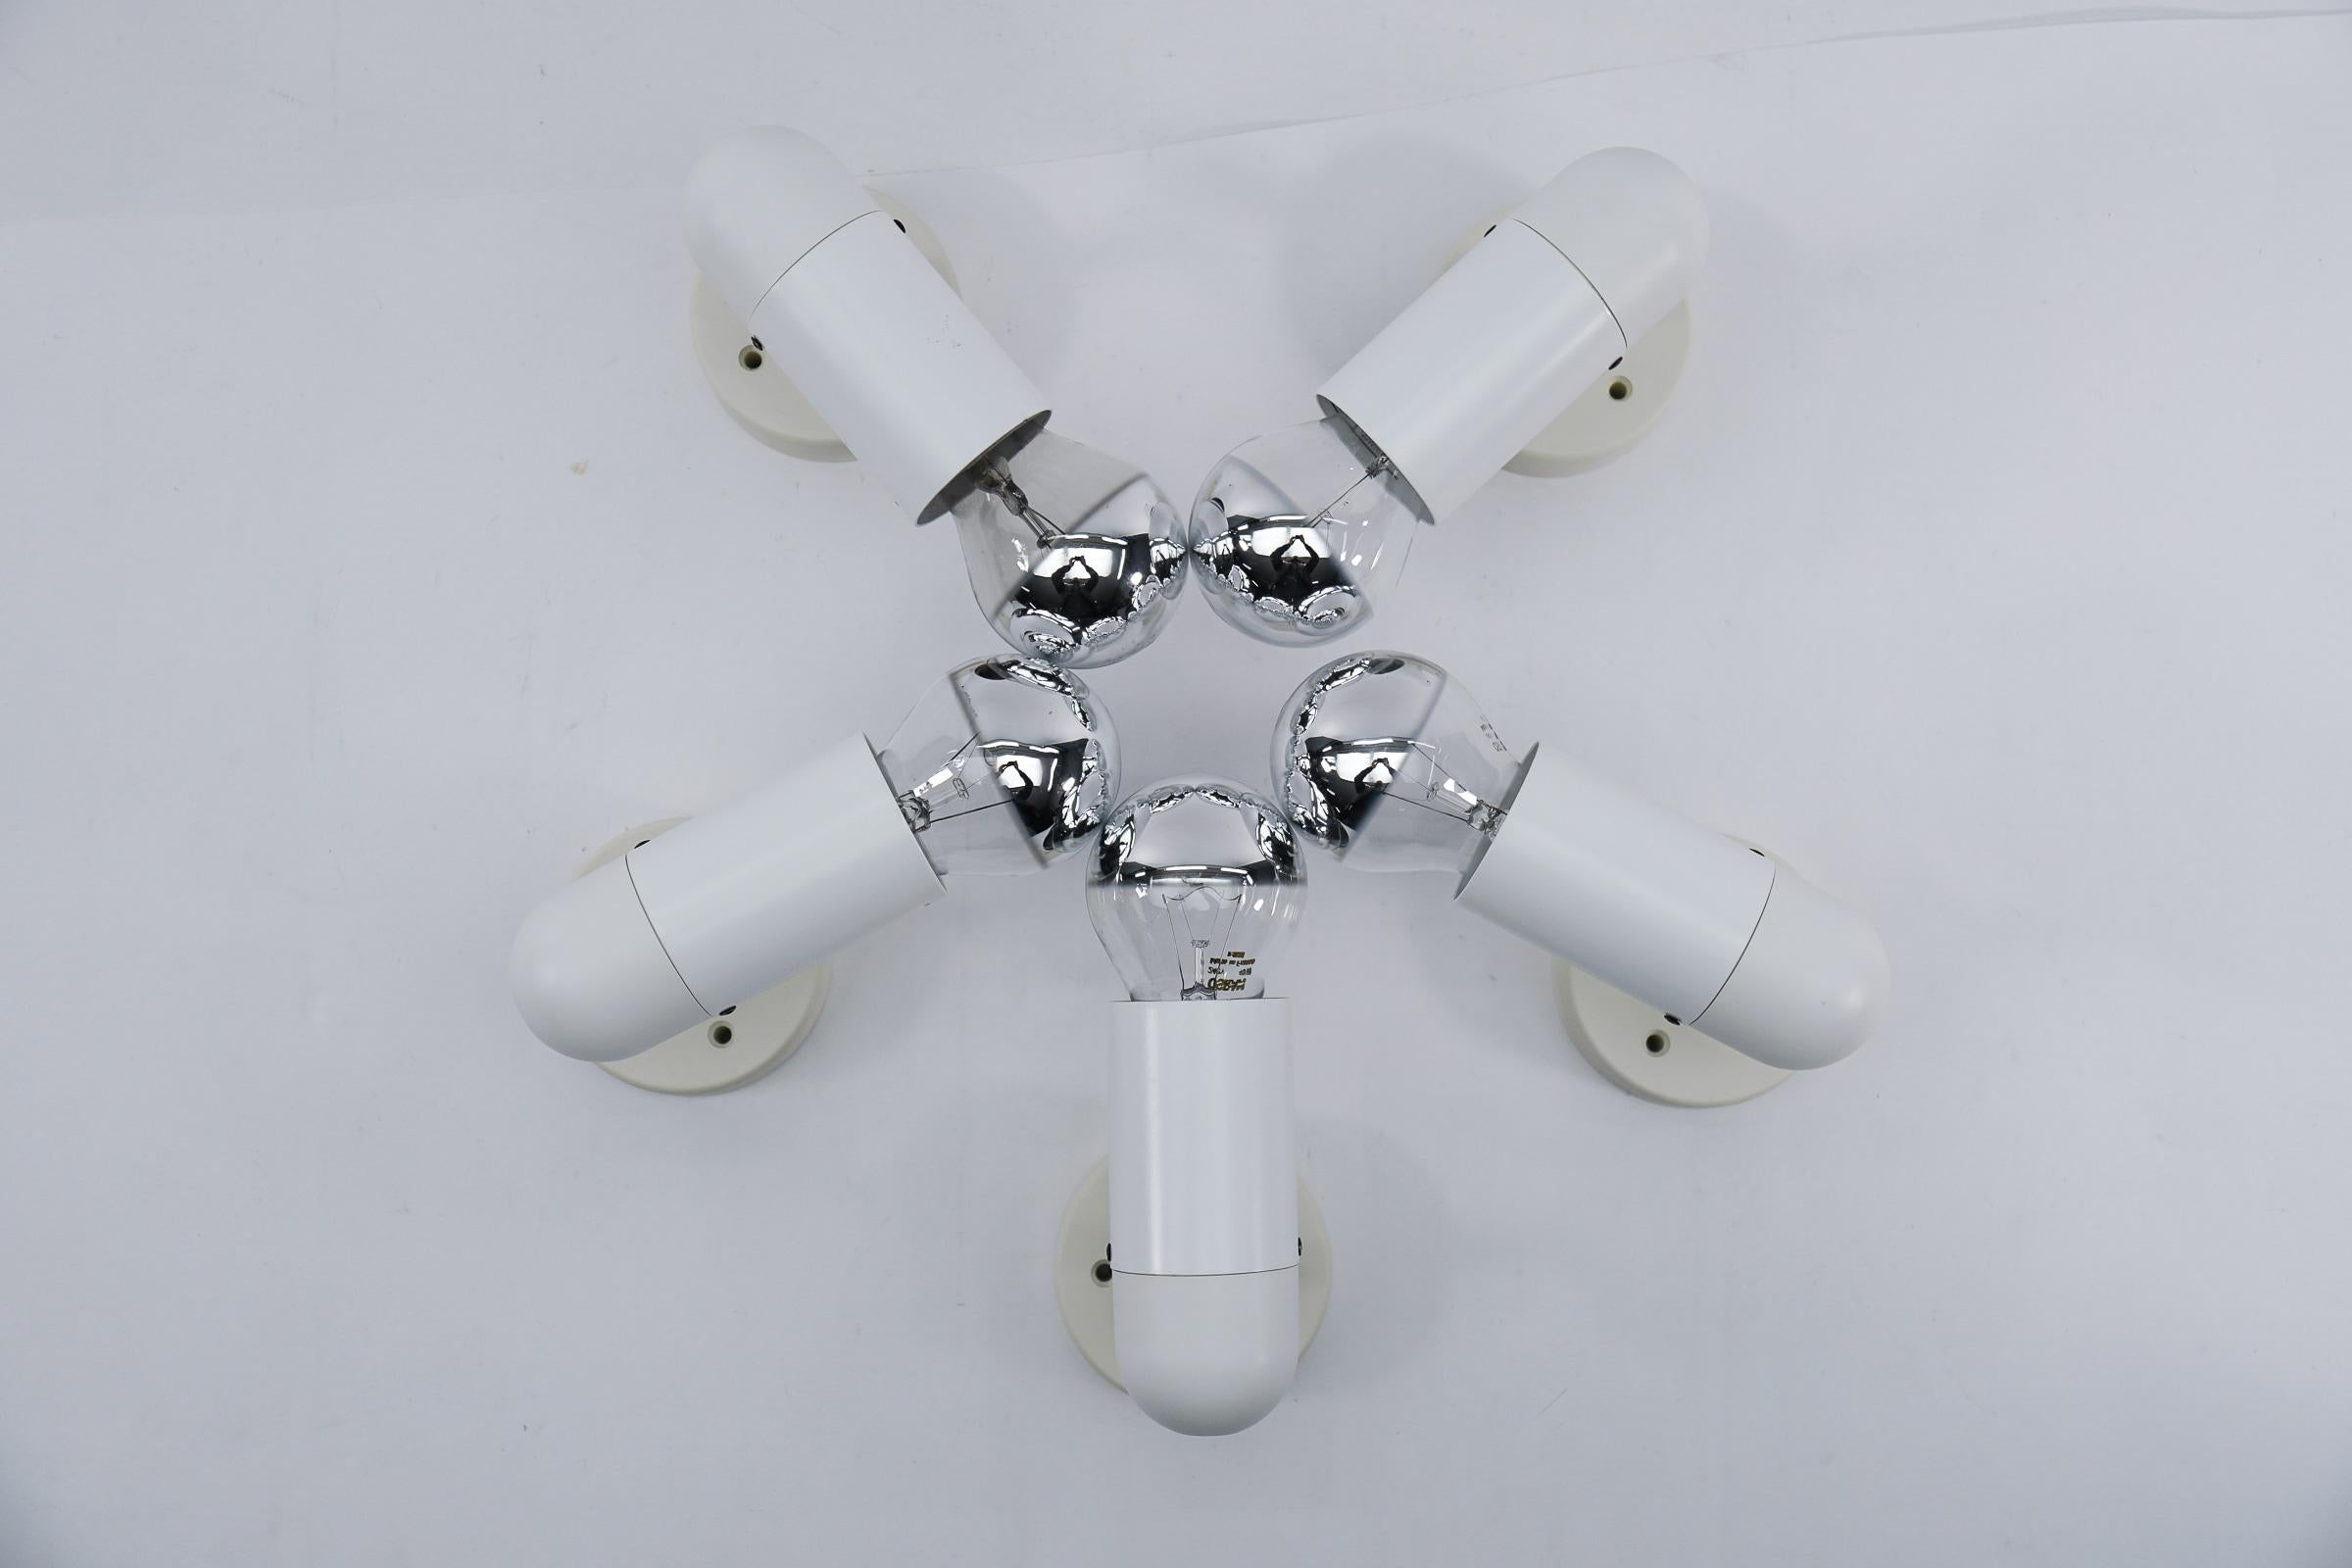 Metal Set of 5 Wall or Ceiling Lamps by Staff Leuchten, 1960s, Germany For Sale